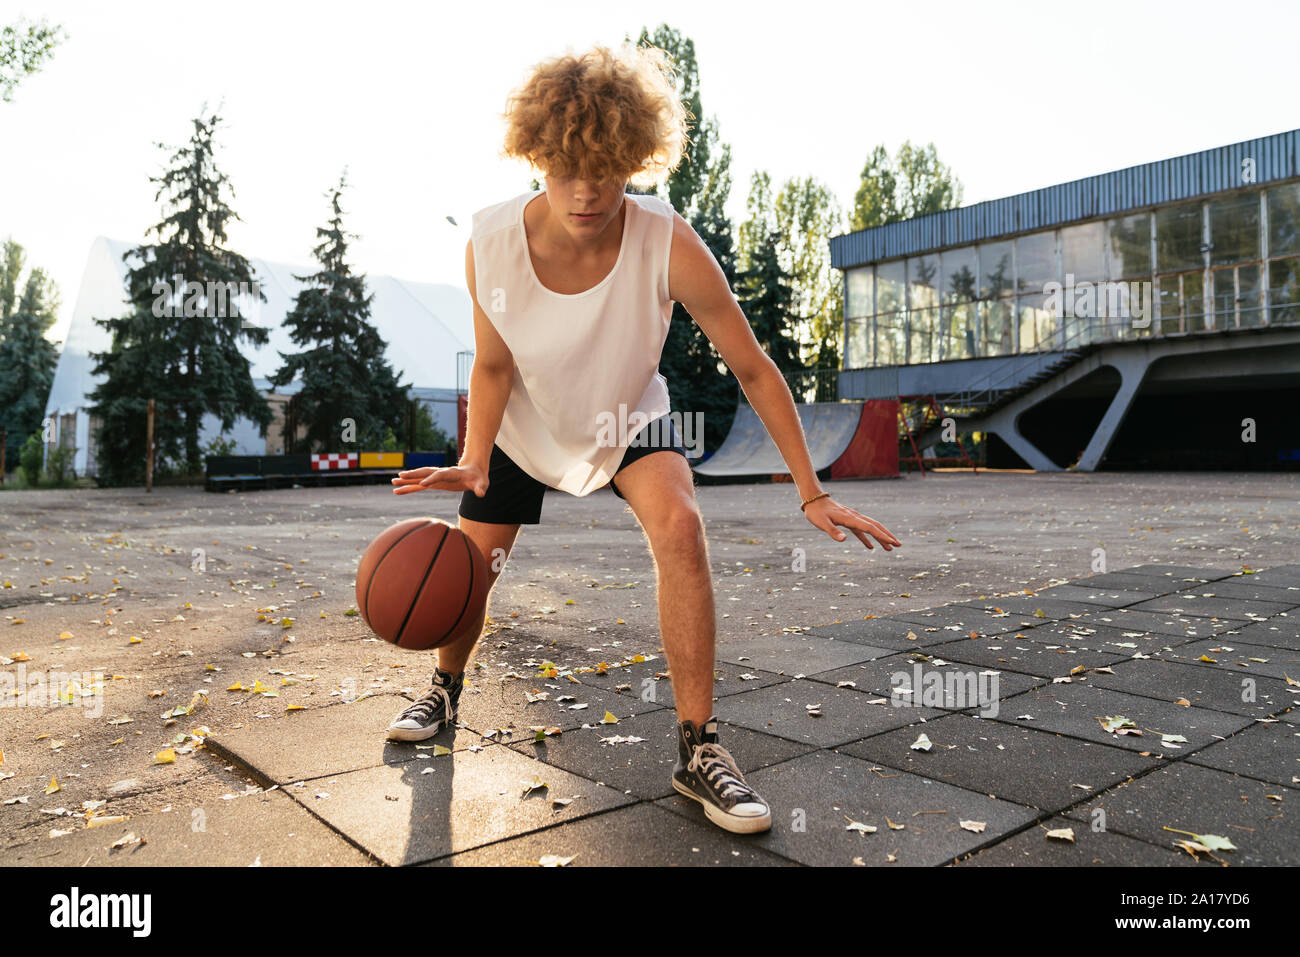 Men with curvy hair play basketball outdoors Stock Photo